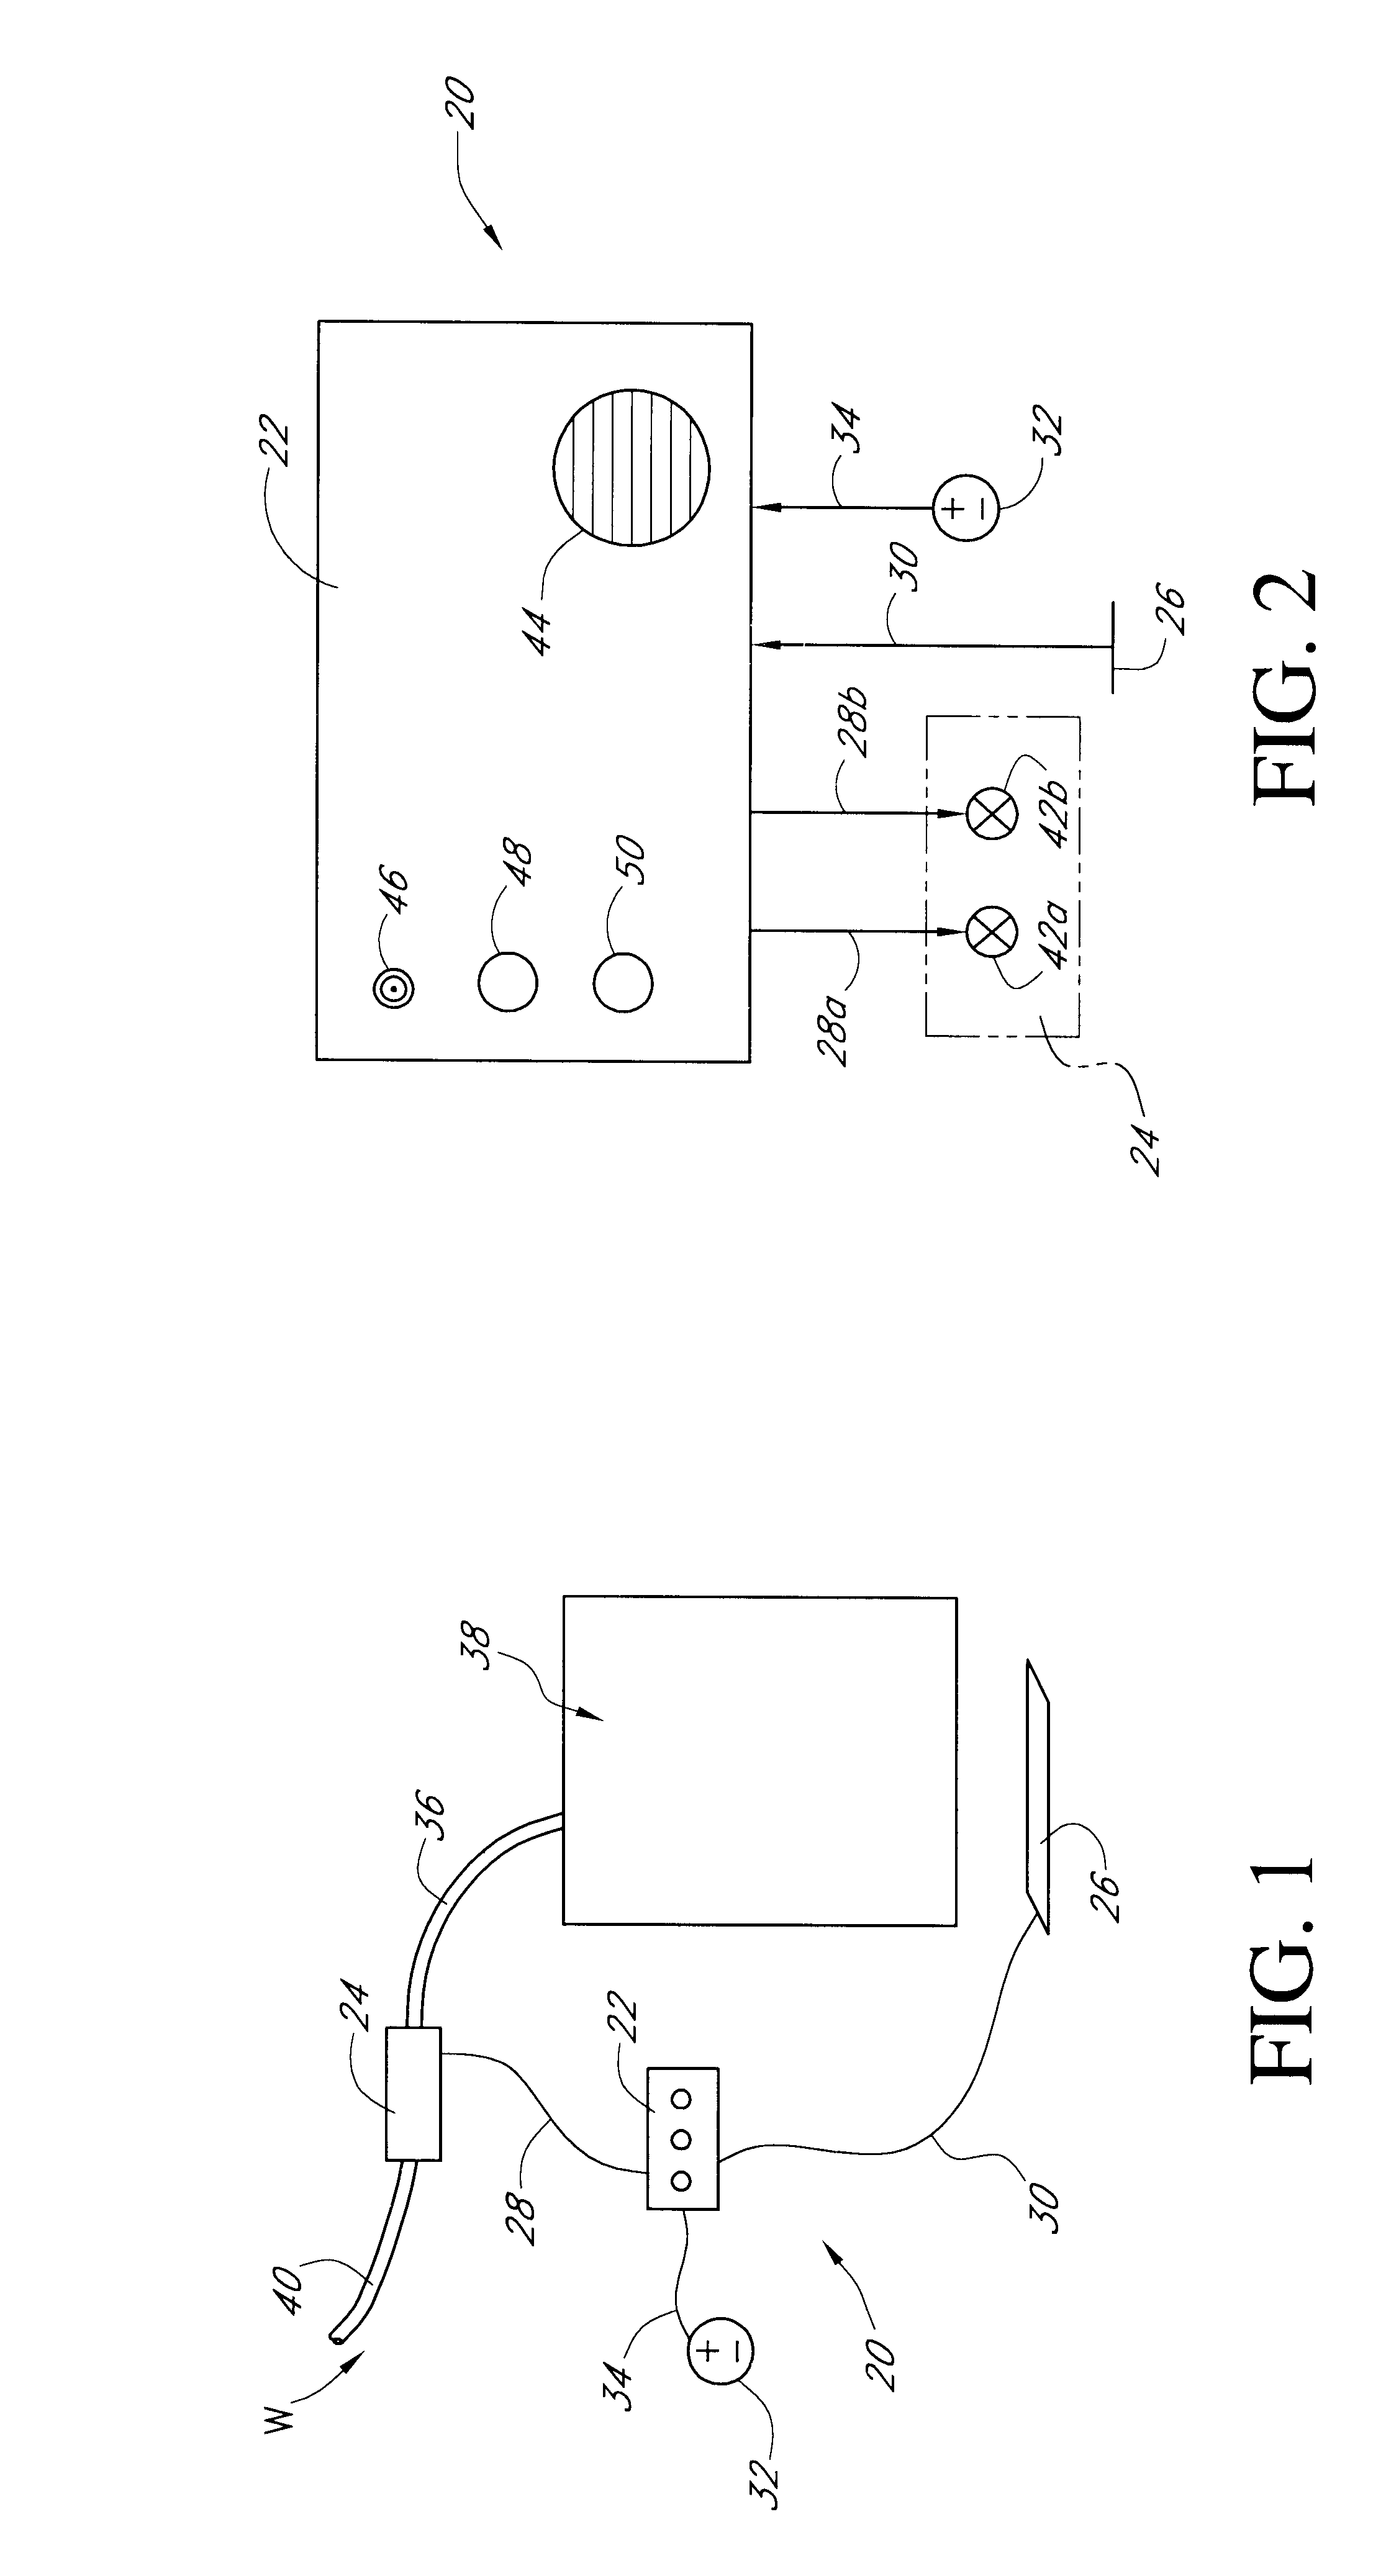 Water leak detection and correction device